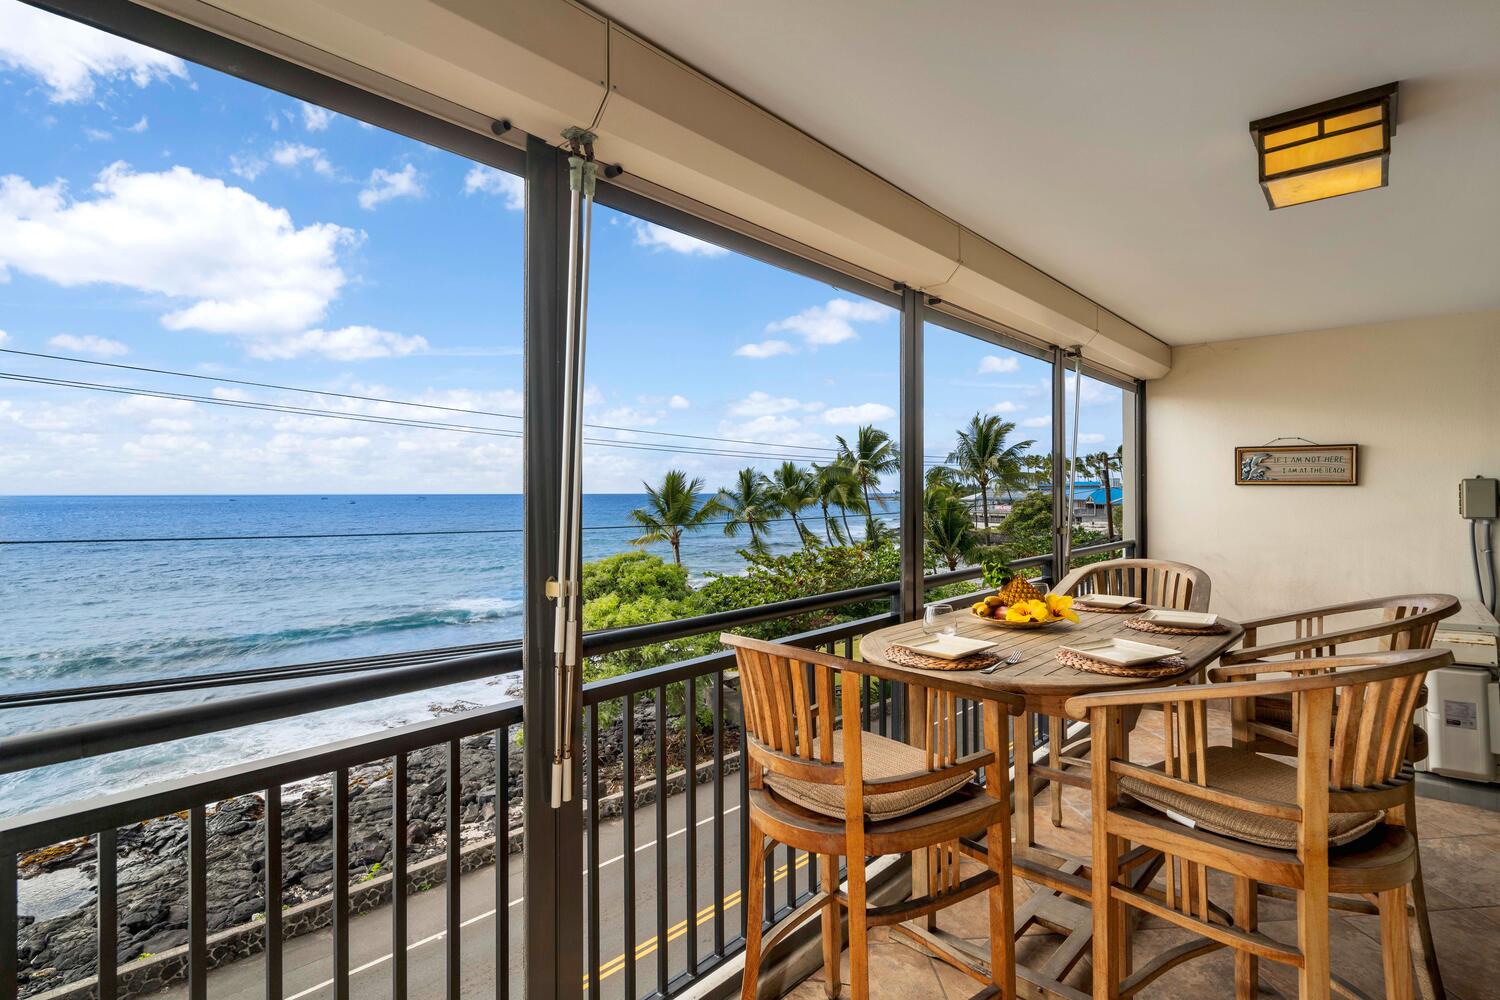 Kailua Kona Vacation Rentals, Kona Alii 302 - Cozy lanai set up for meals with a view of the Pacific waves.